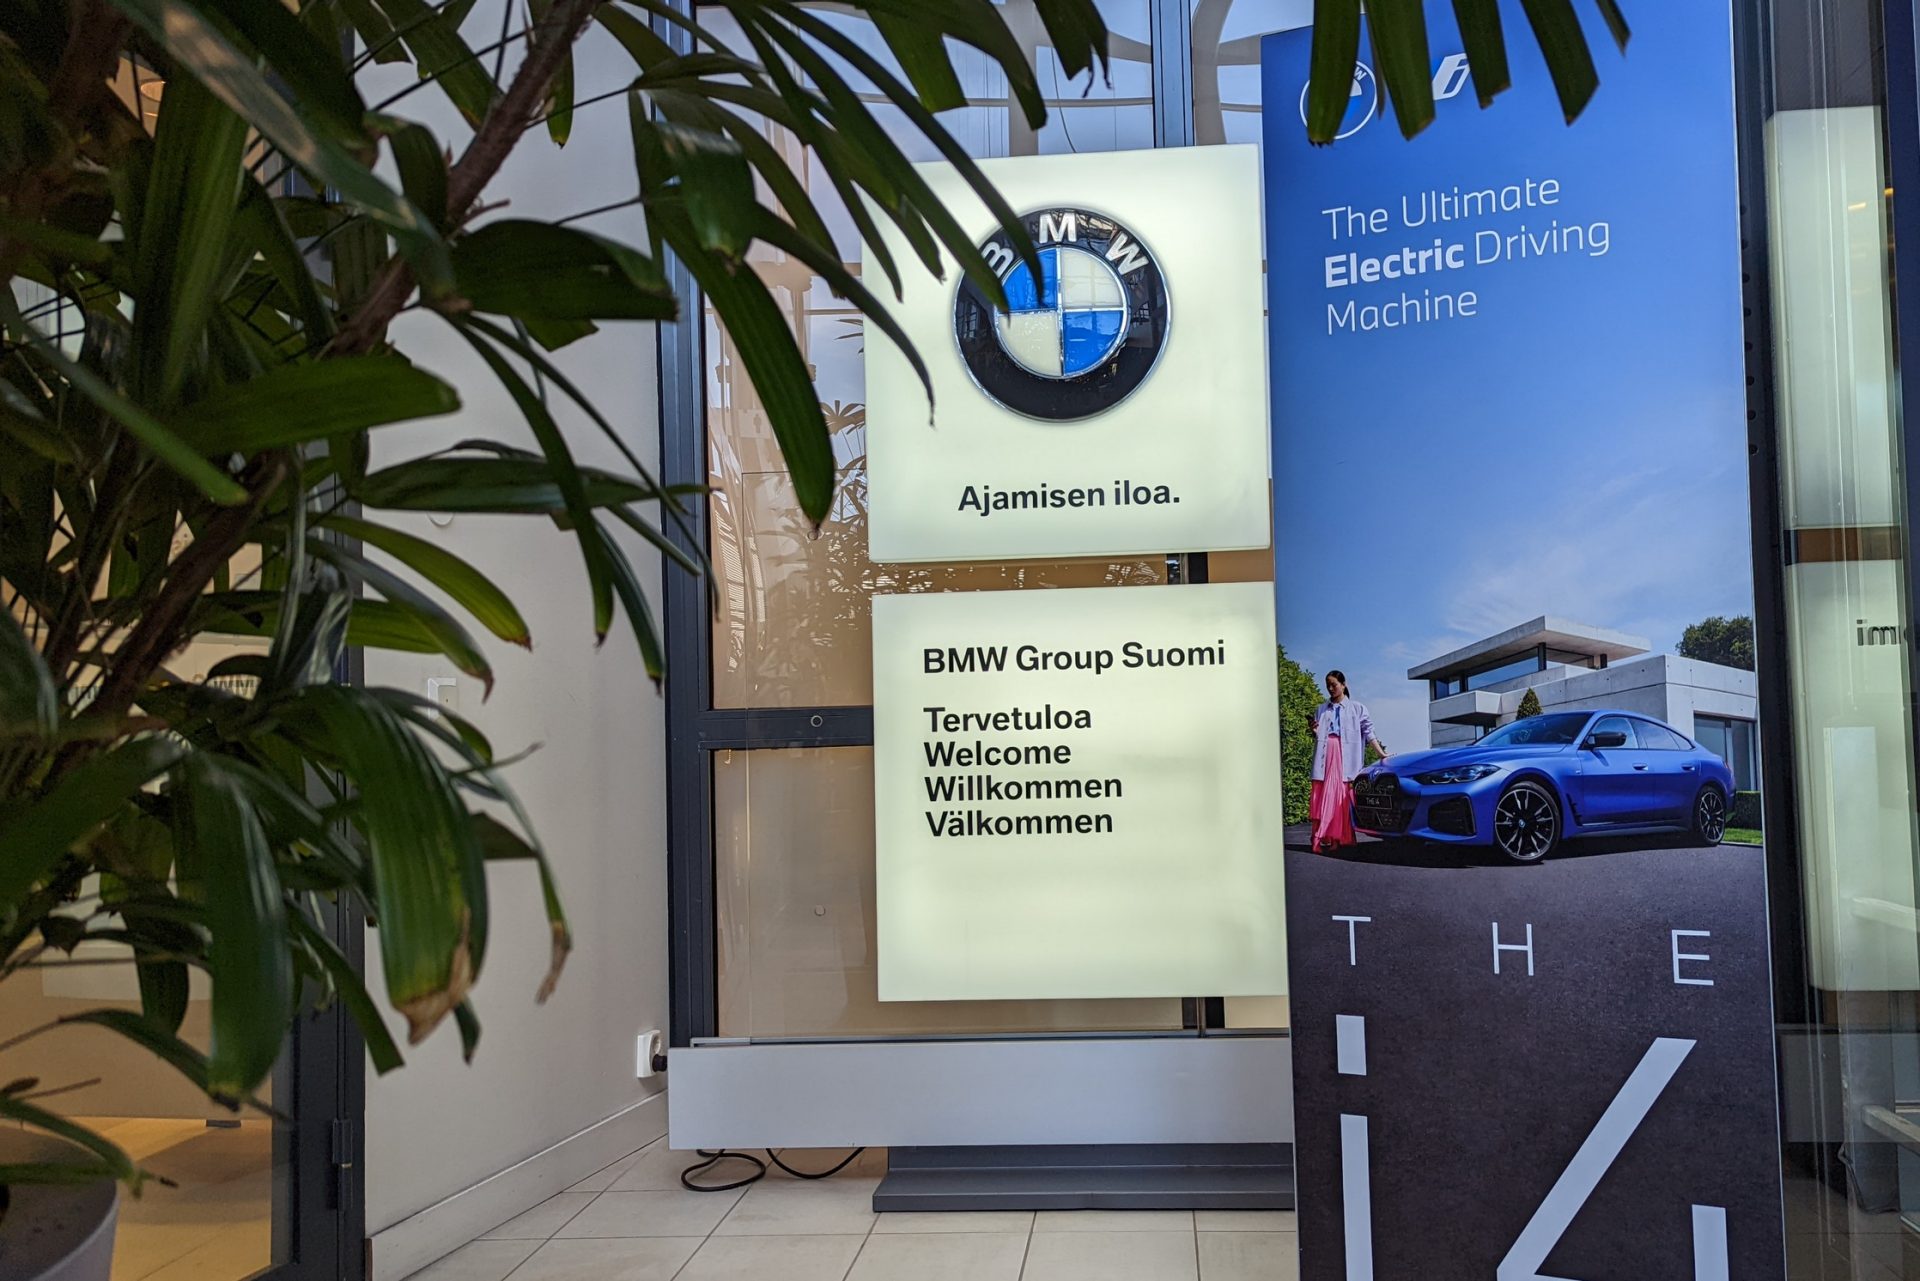 This picture shows the entrance of a BMW office in Finland.